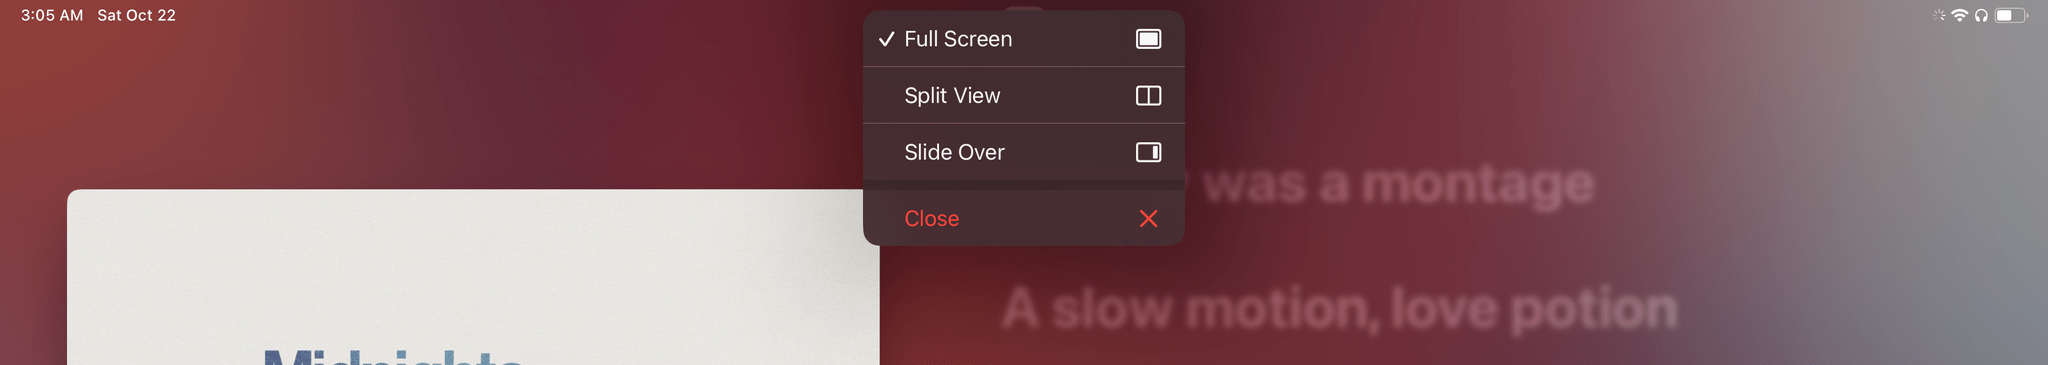 Let me tell you something you won't be able to unsee: in Stage Manager, the button is called Fullscreen; in Split View, it's labeled Full Screen. I'm sorry.